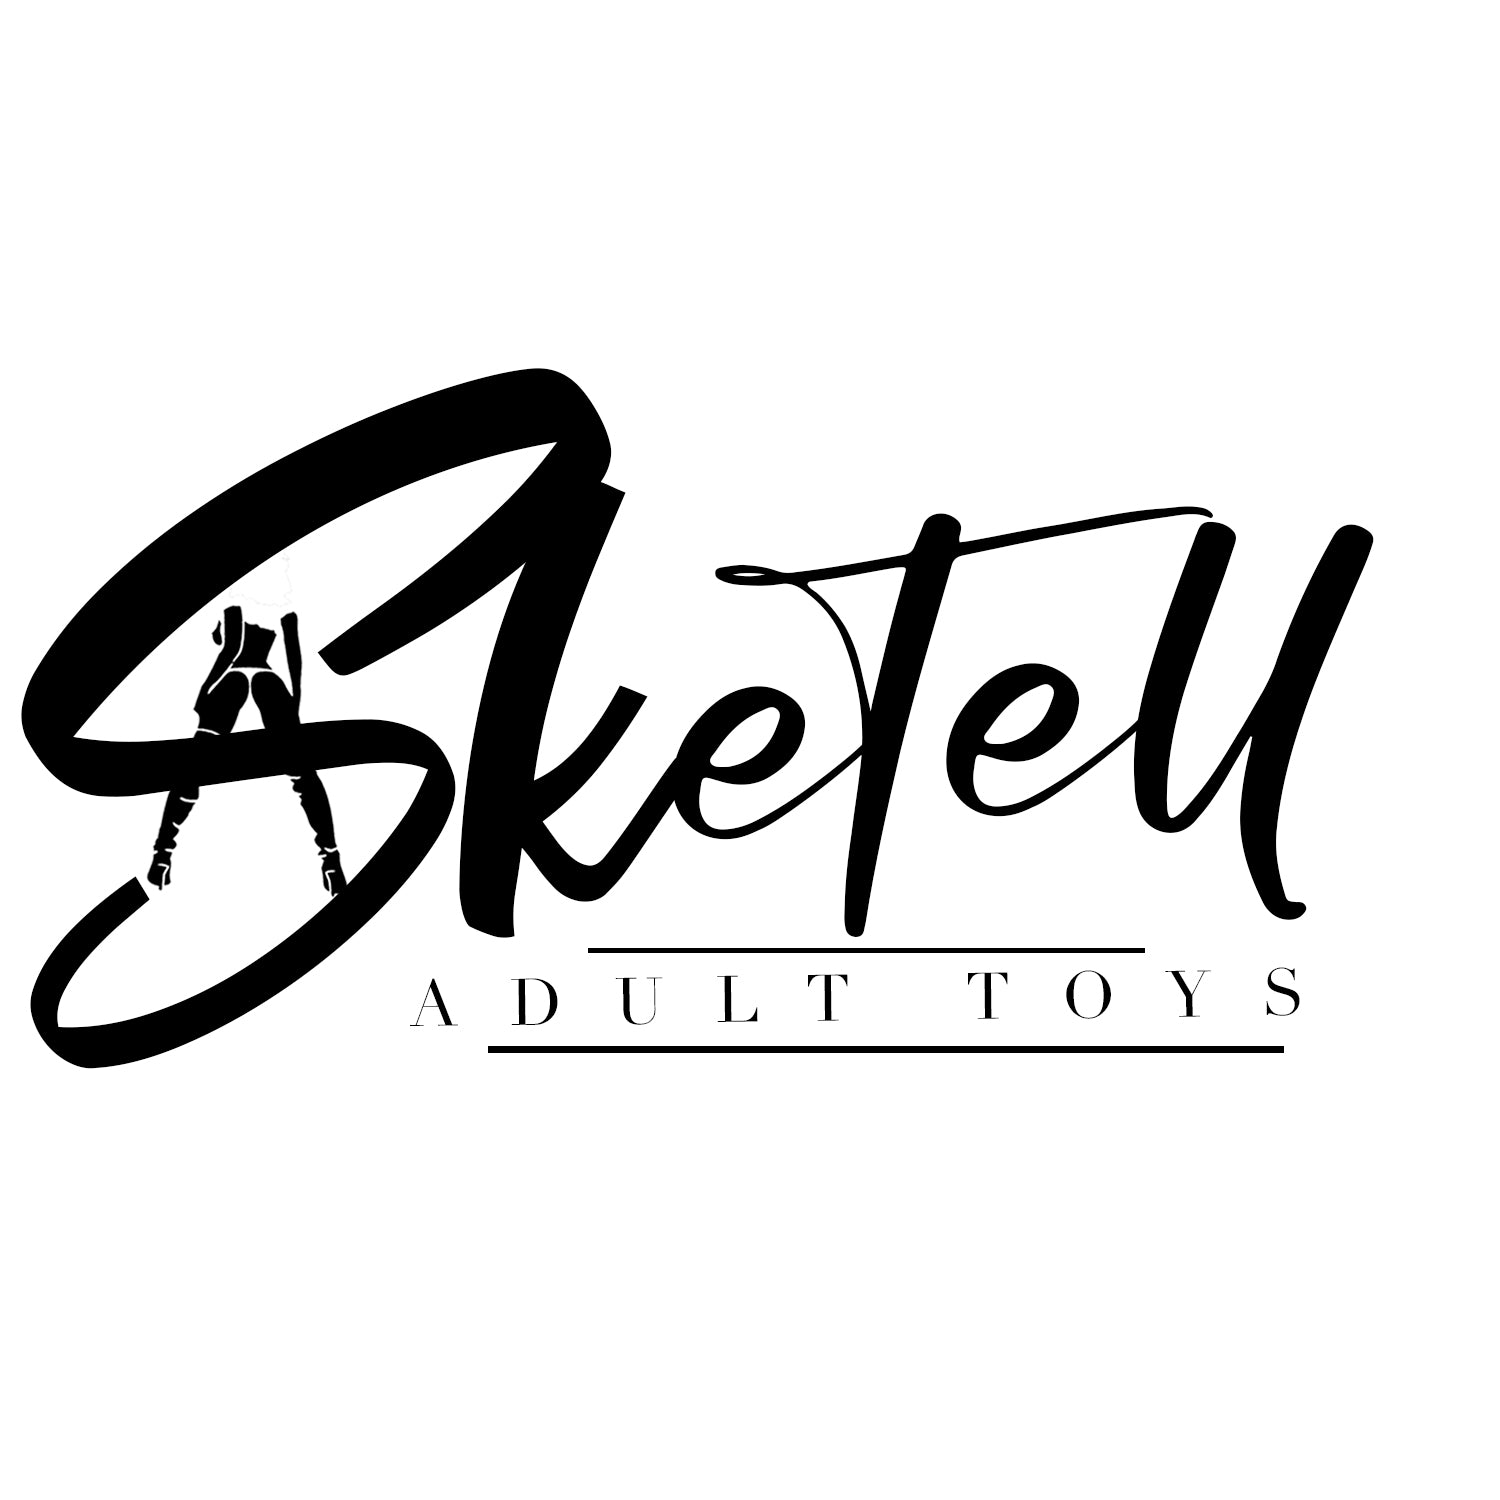 Sketell Adult Toys 